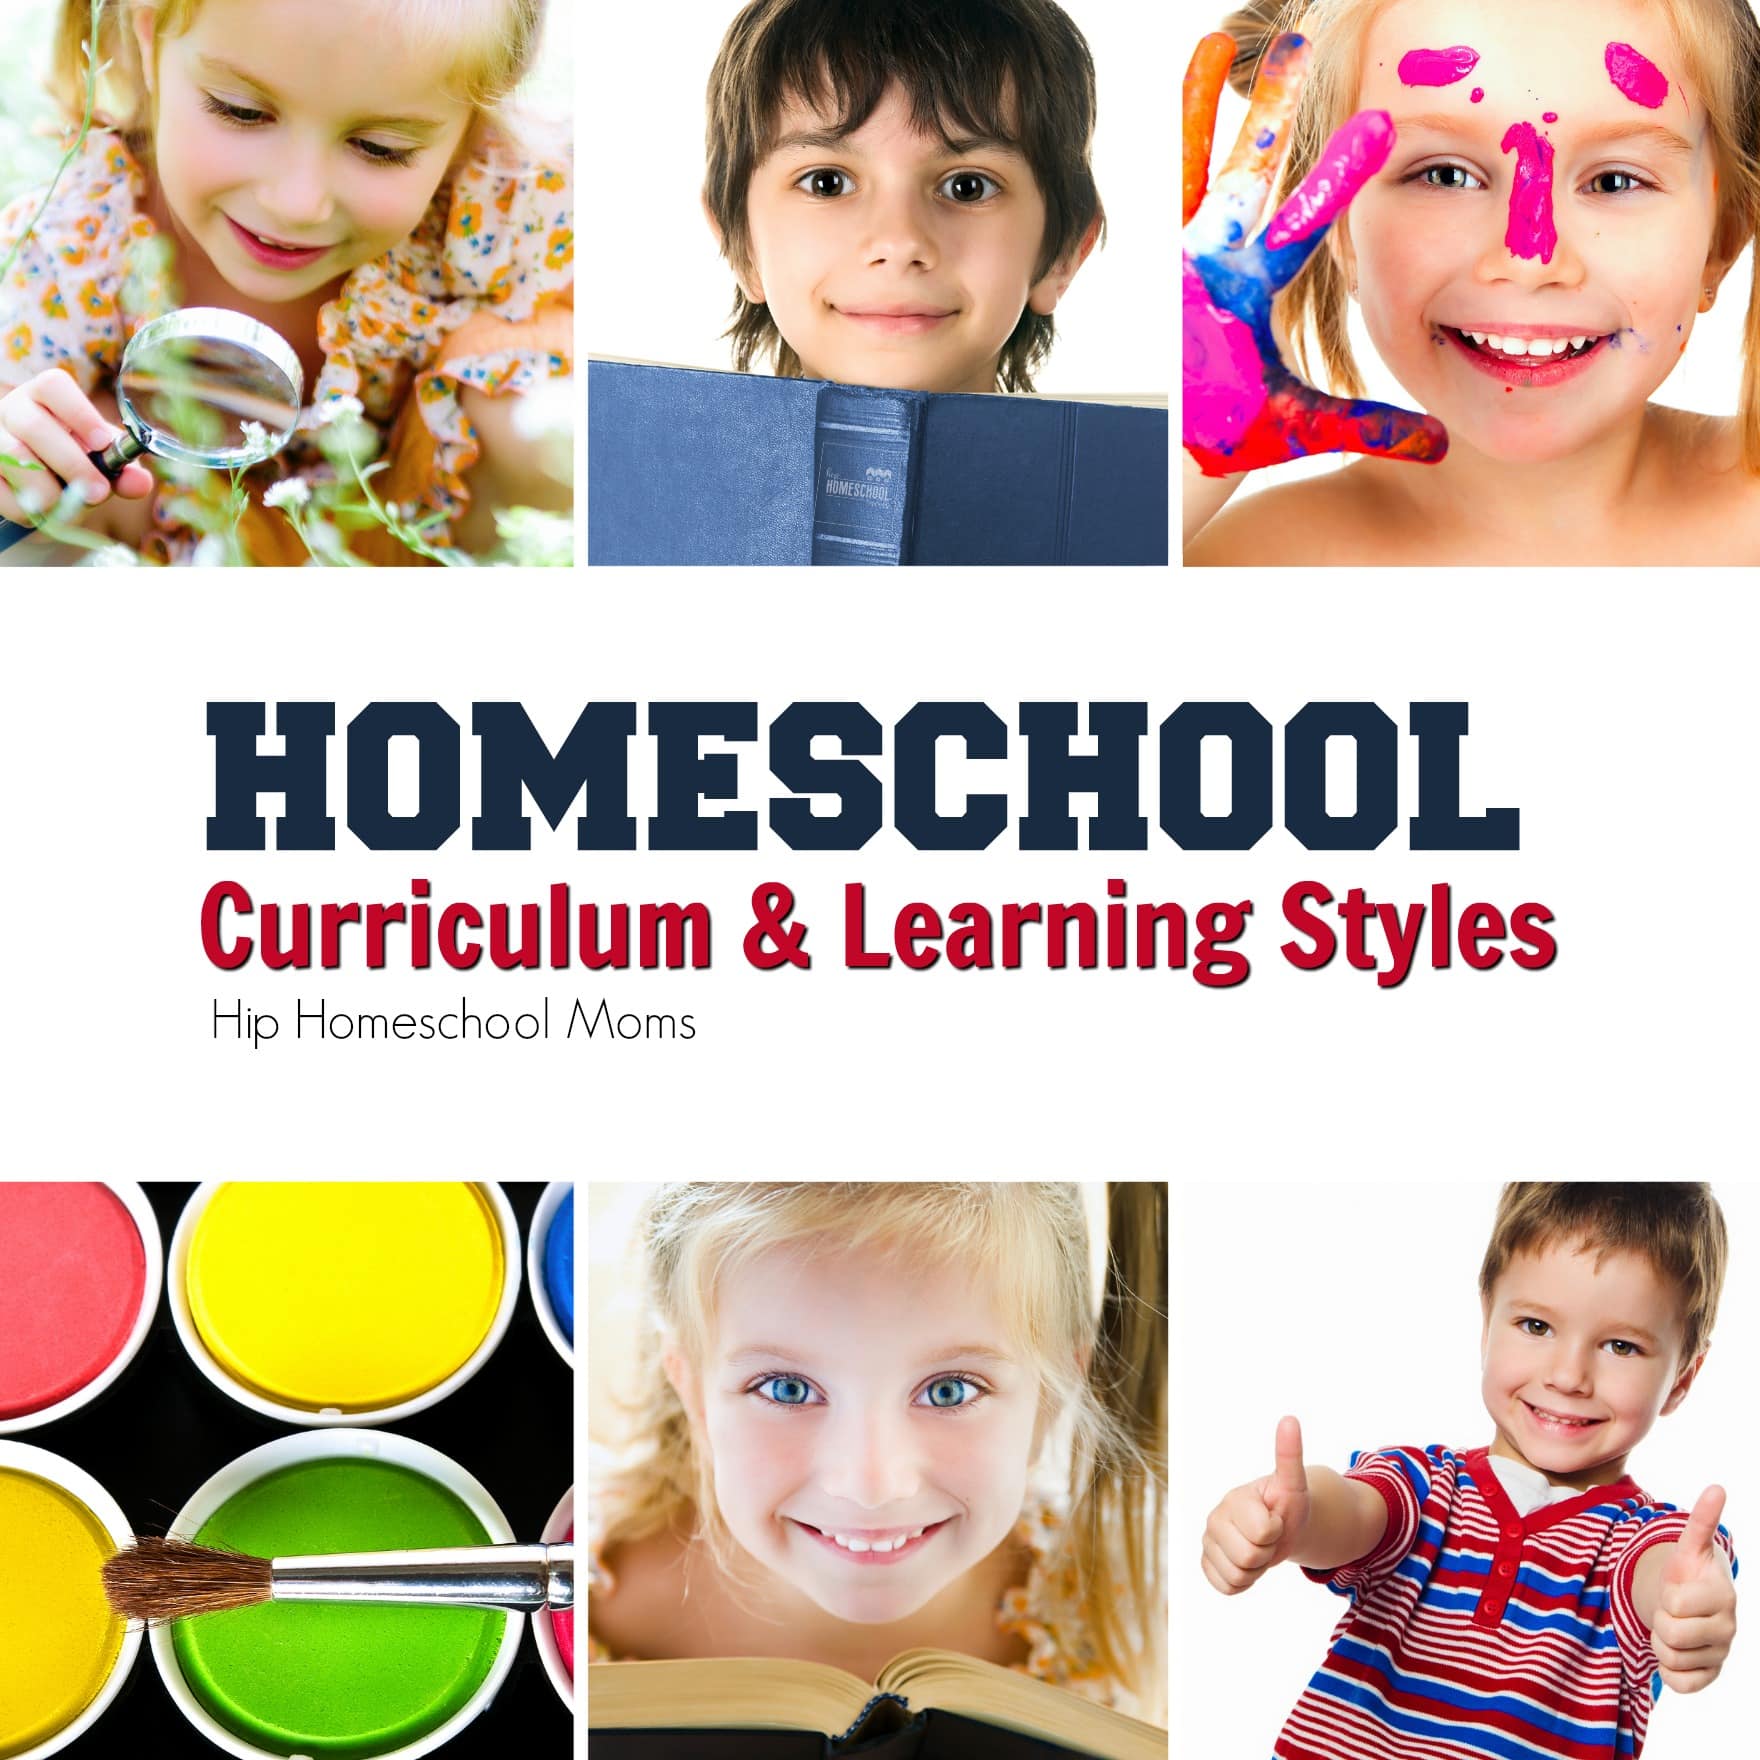 Homeschool Curriculum and Learning Styles